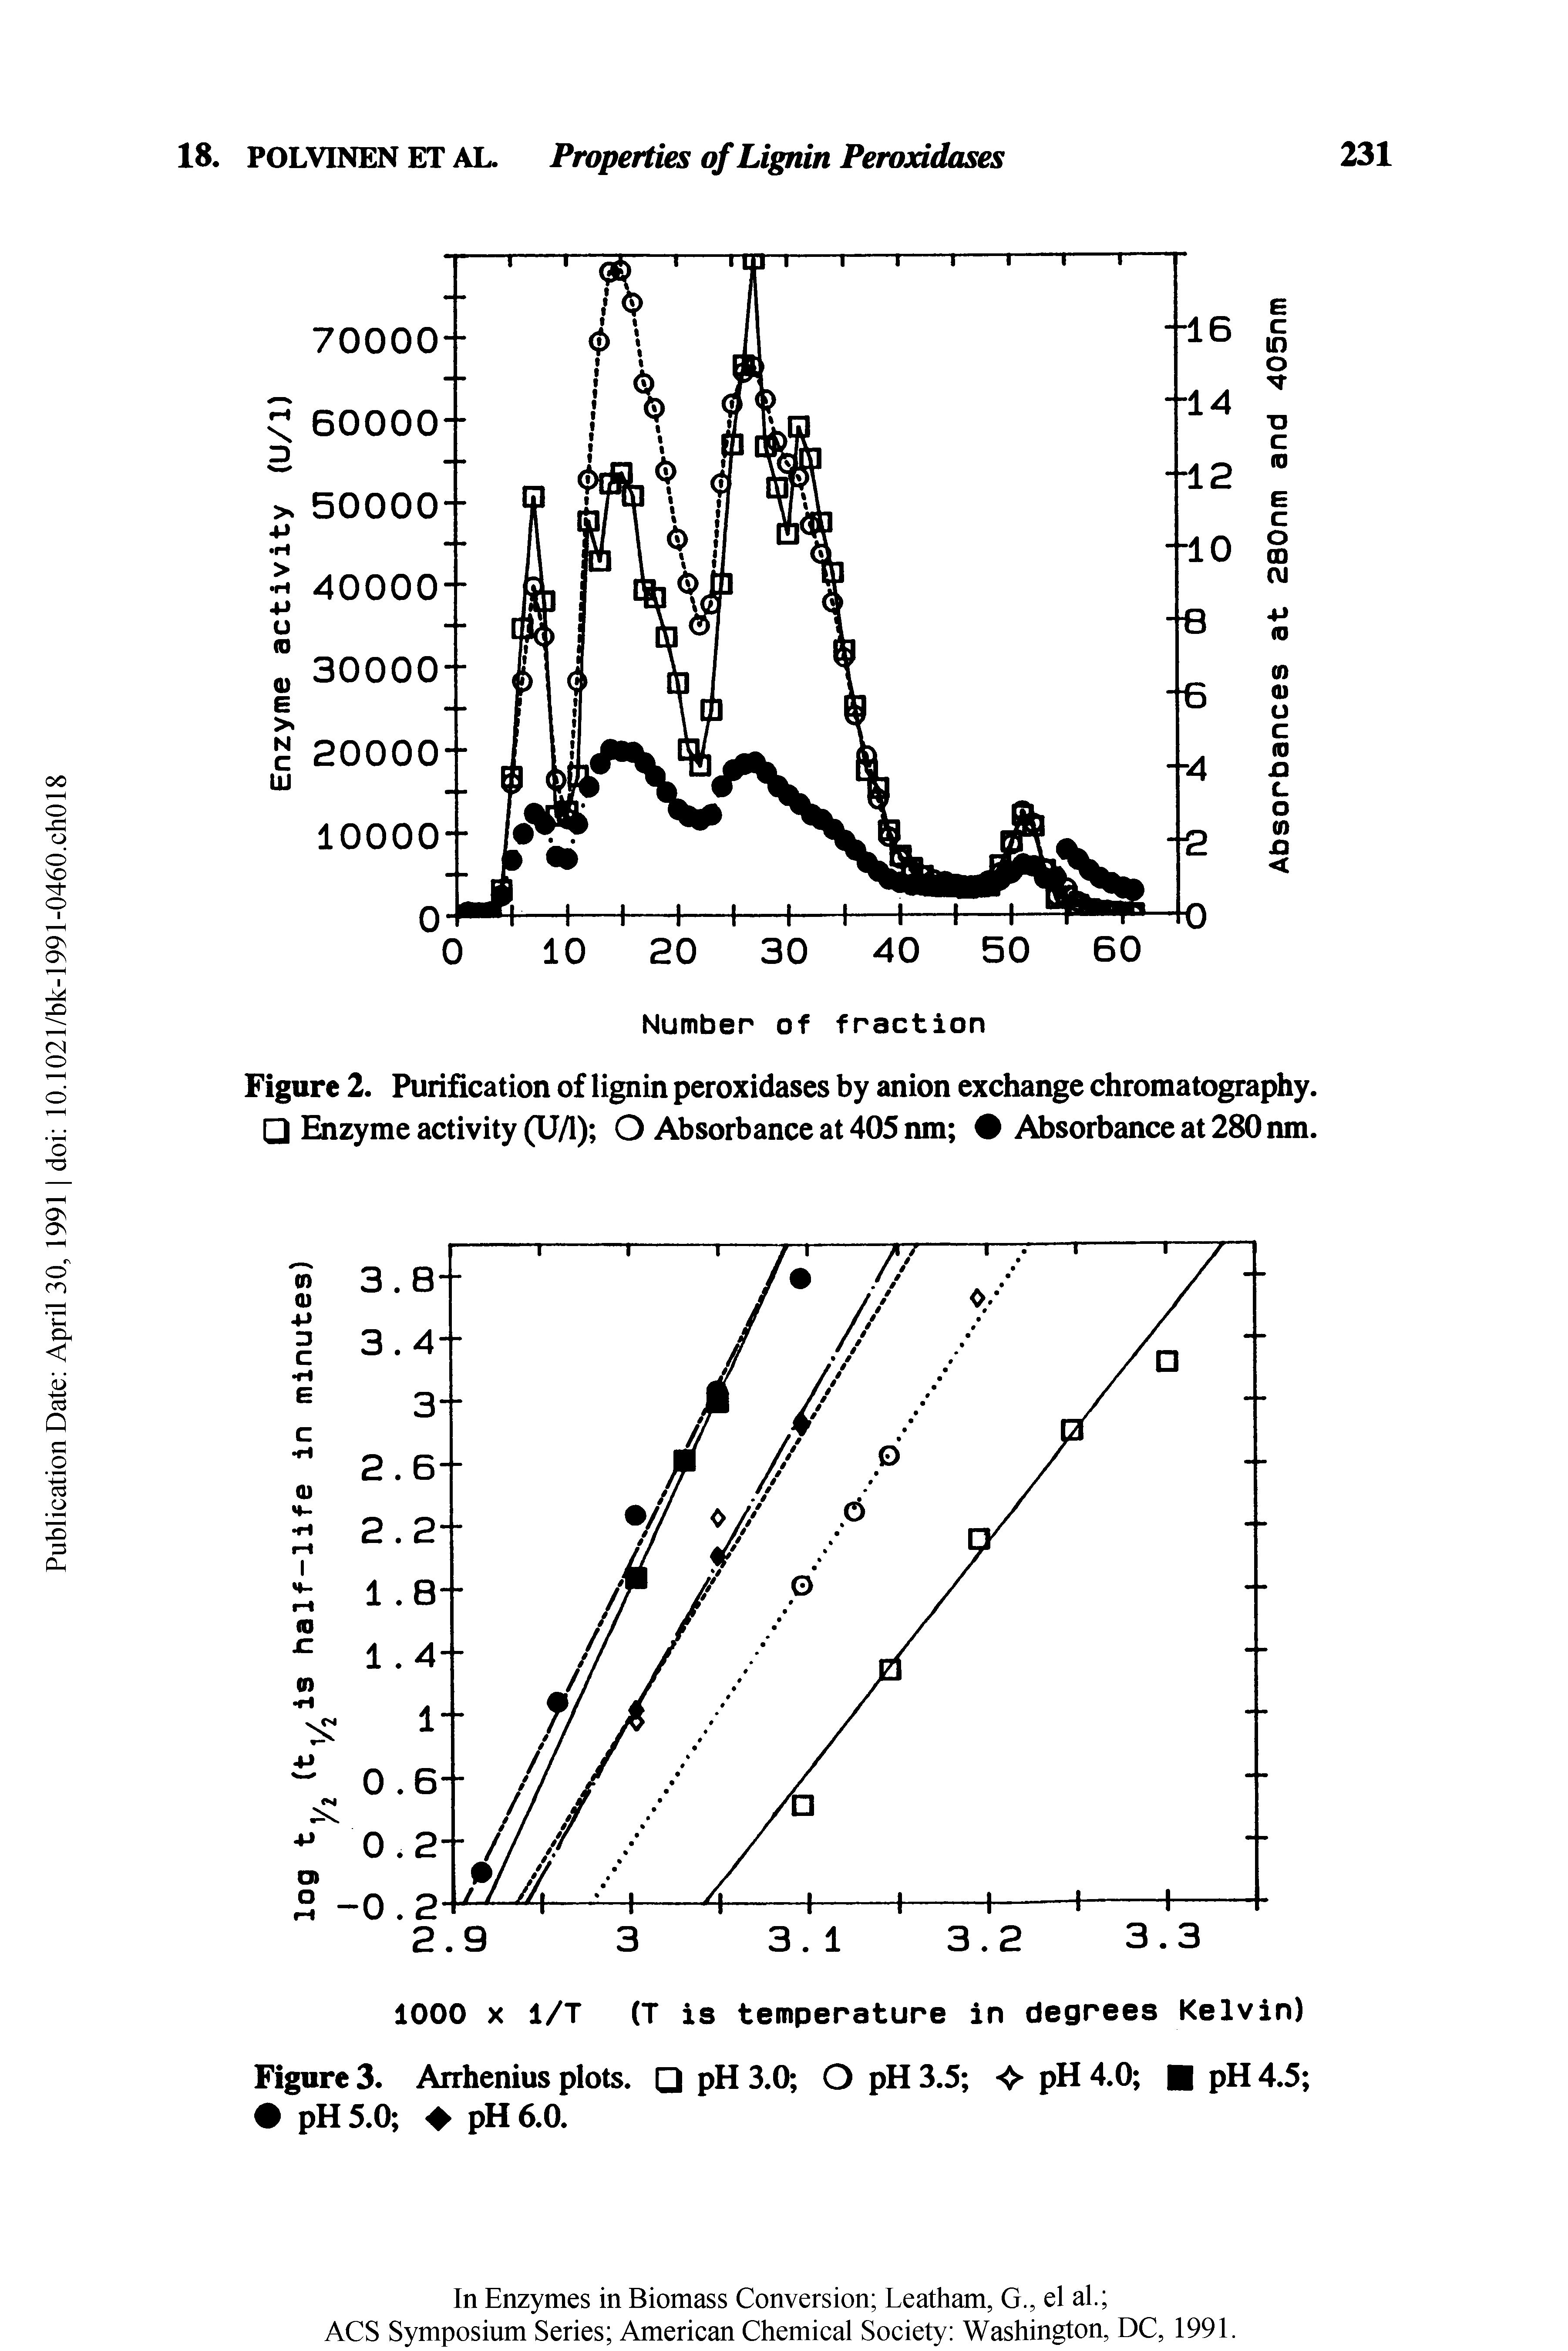 Figure 2. Purification of lignin peroxidases by anion exchange chromatography. Enzyme activity (U/1) O Absorbance at 405 nm Absorbance at 280 nm.